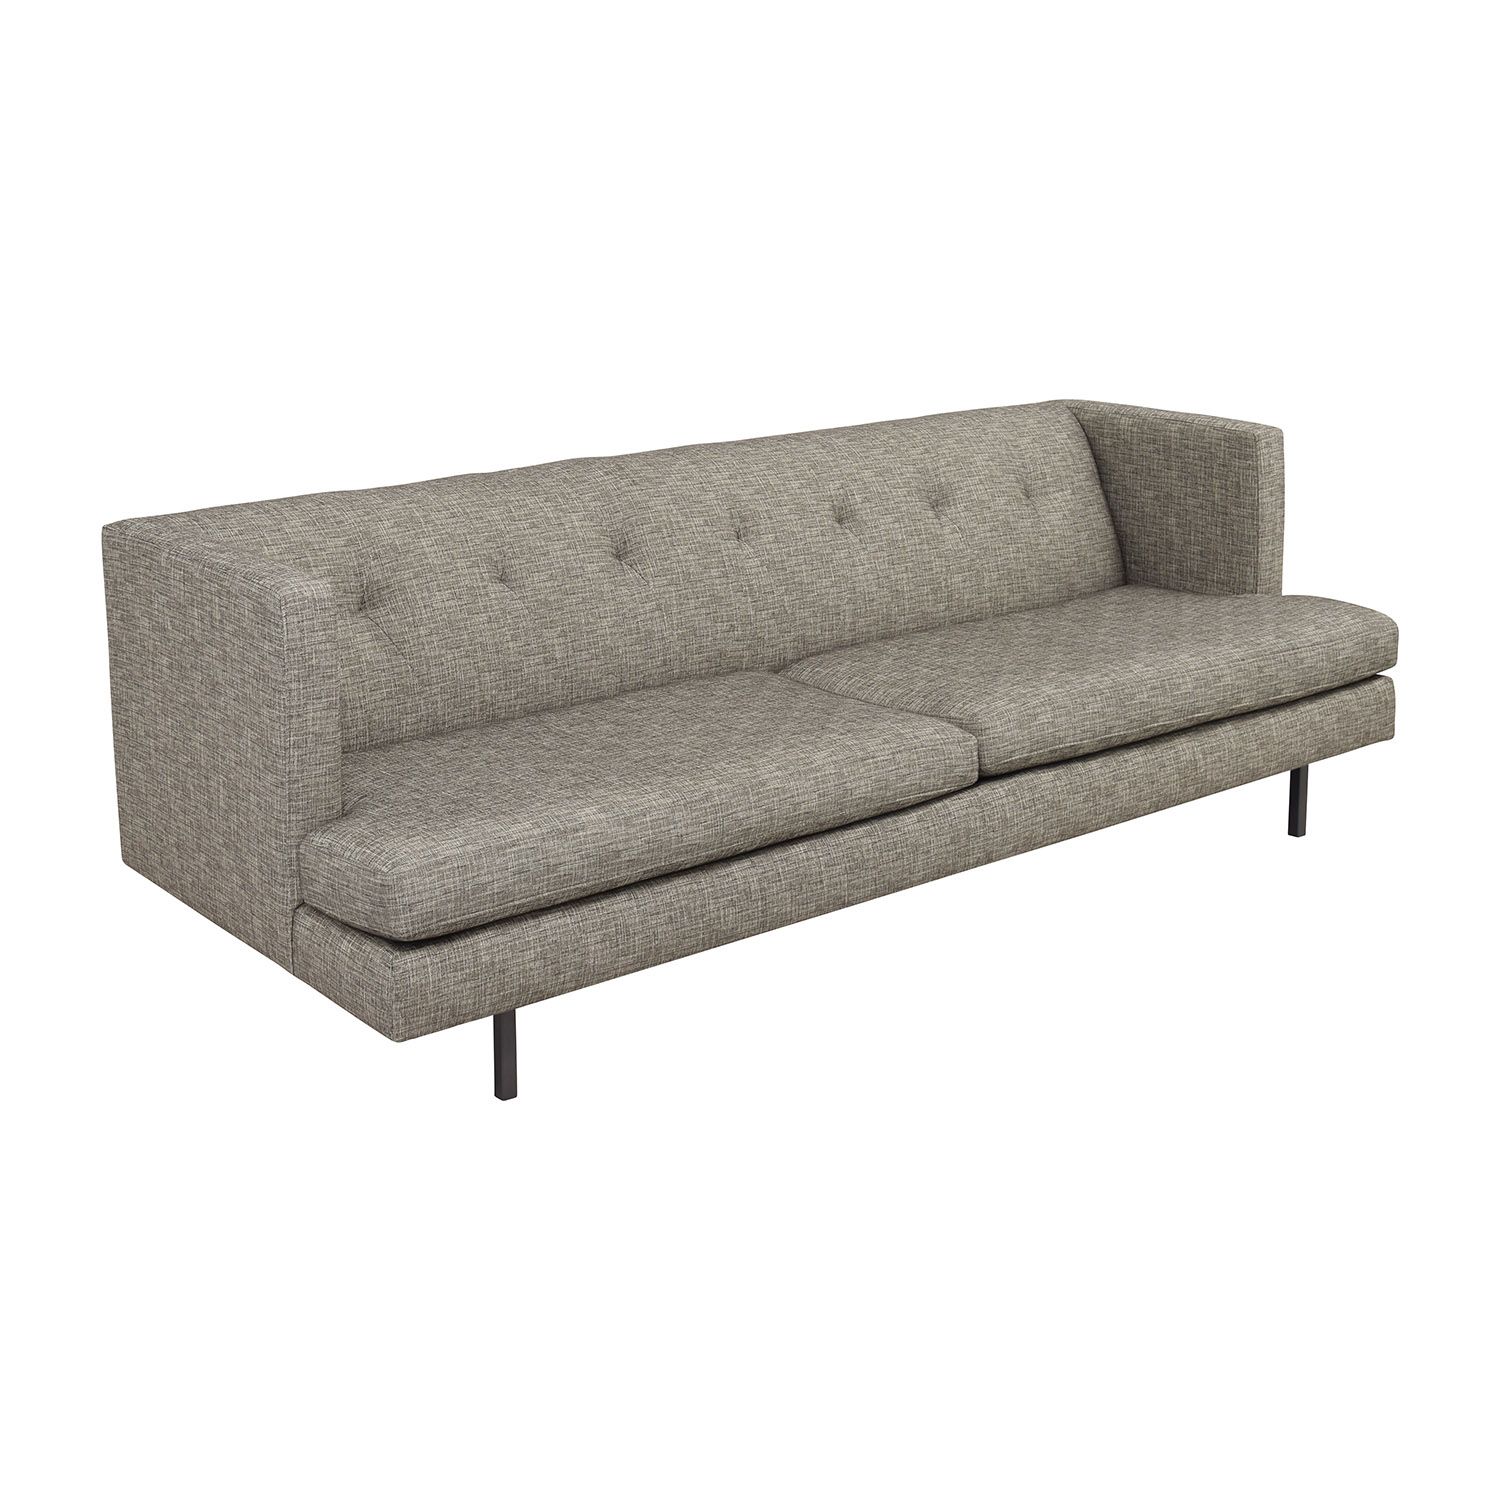 Furniture: West Elm Crosby | West Elm Tillary Sofa | West Elm Paige Sofa Intended For Elm Sofa Chairs (View 7 of 25)